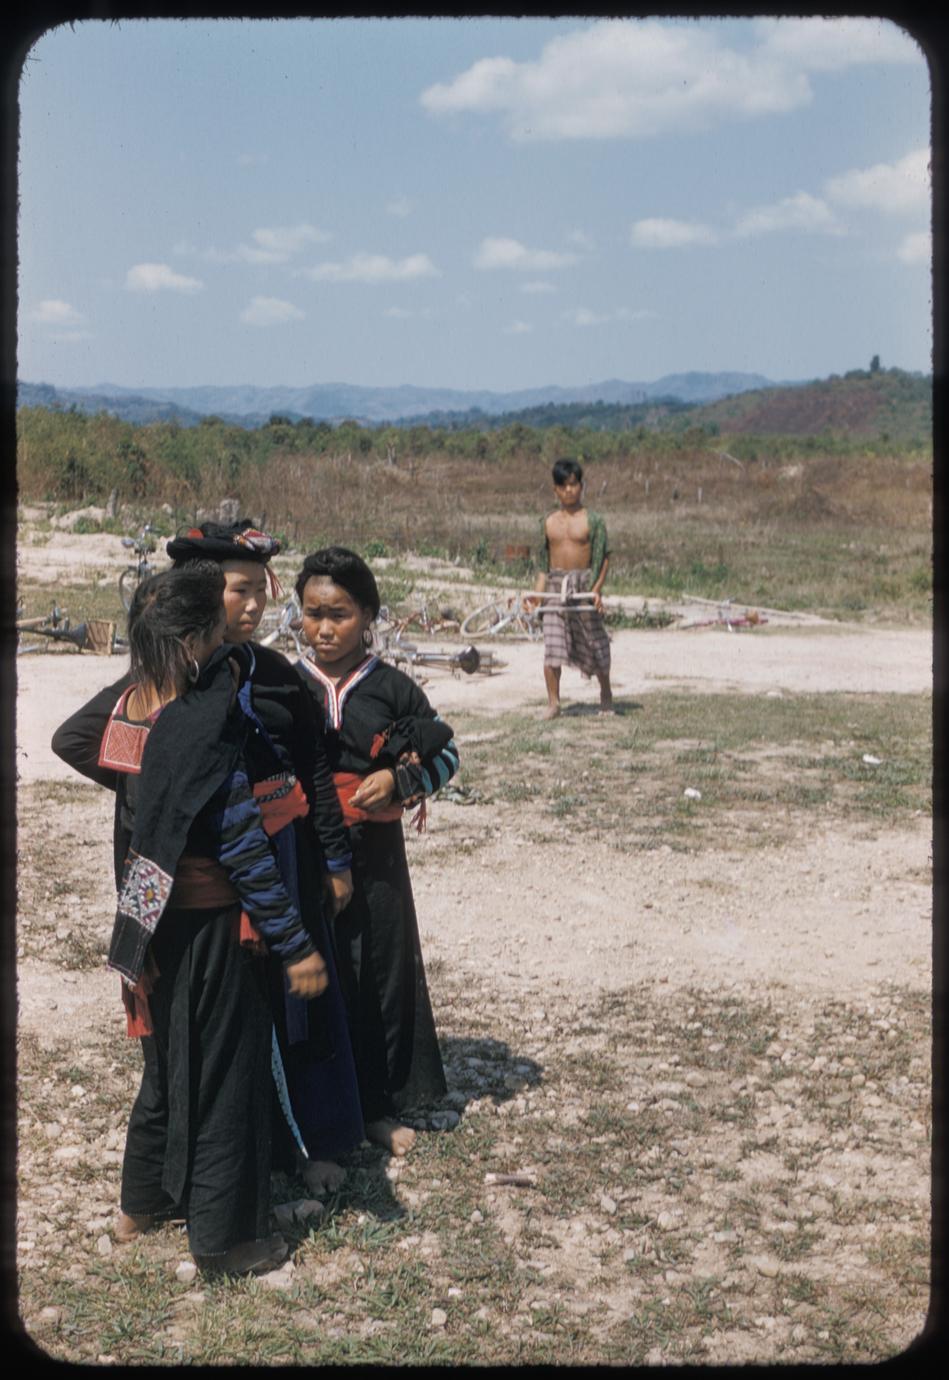 Hmong (Meo) group at airfield